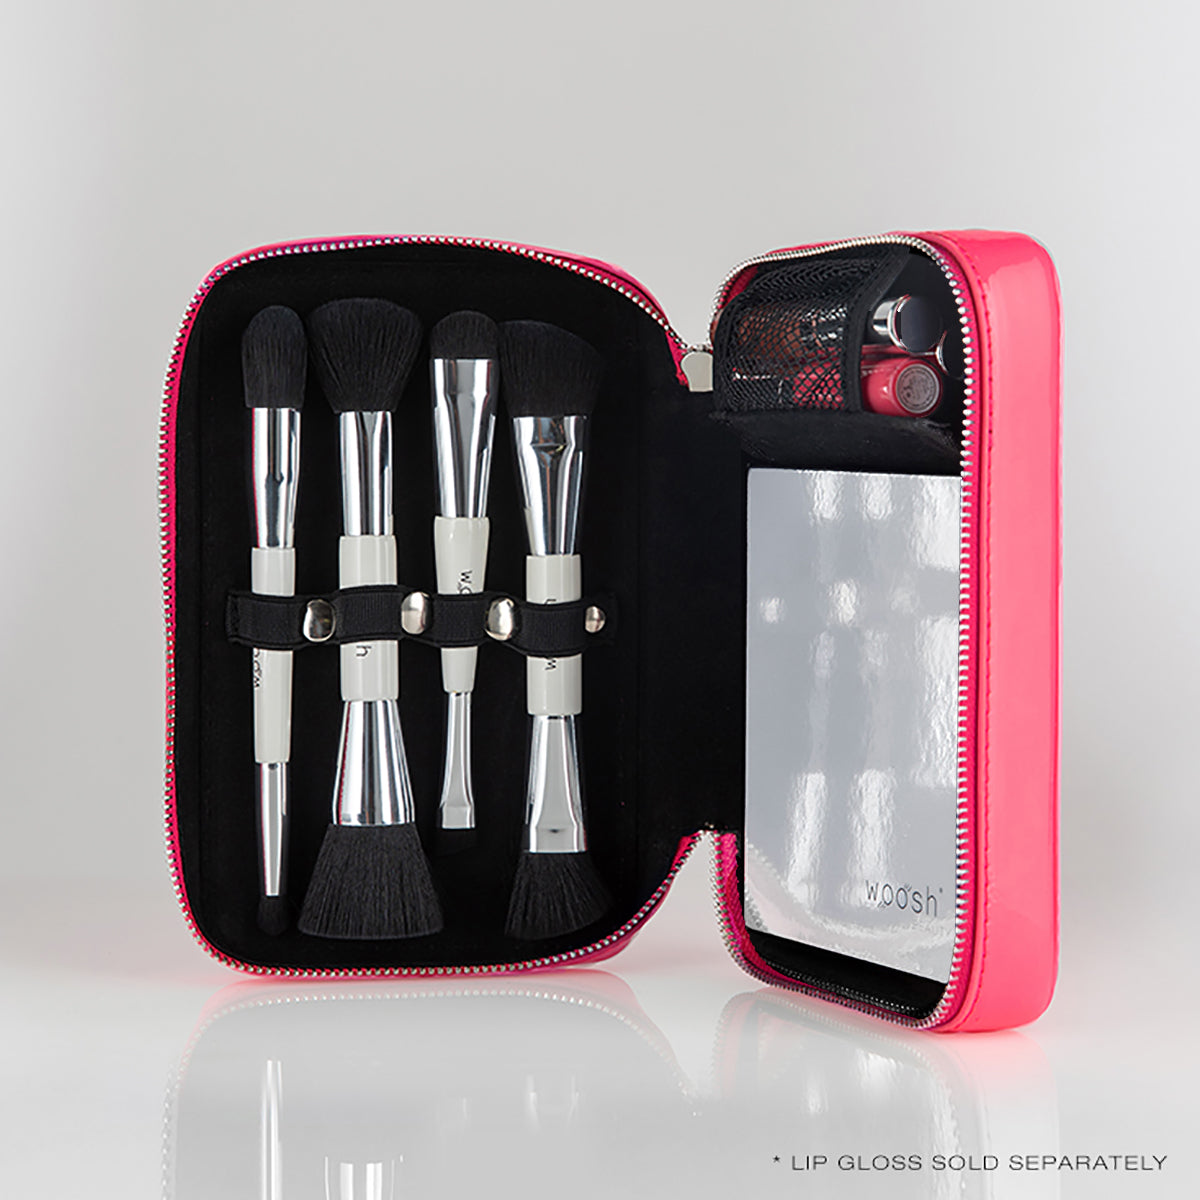 Pink Fold Out Case can hold: 4 essential brushes, 3 lip glosses, and 1 fold out face palette. Has adjustable elastic straps that snap into place to make it easy to add brushes of different sizes. Has a mesh pocket perfect for holding spare makeup you need on the go.